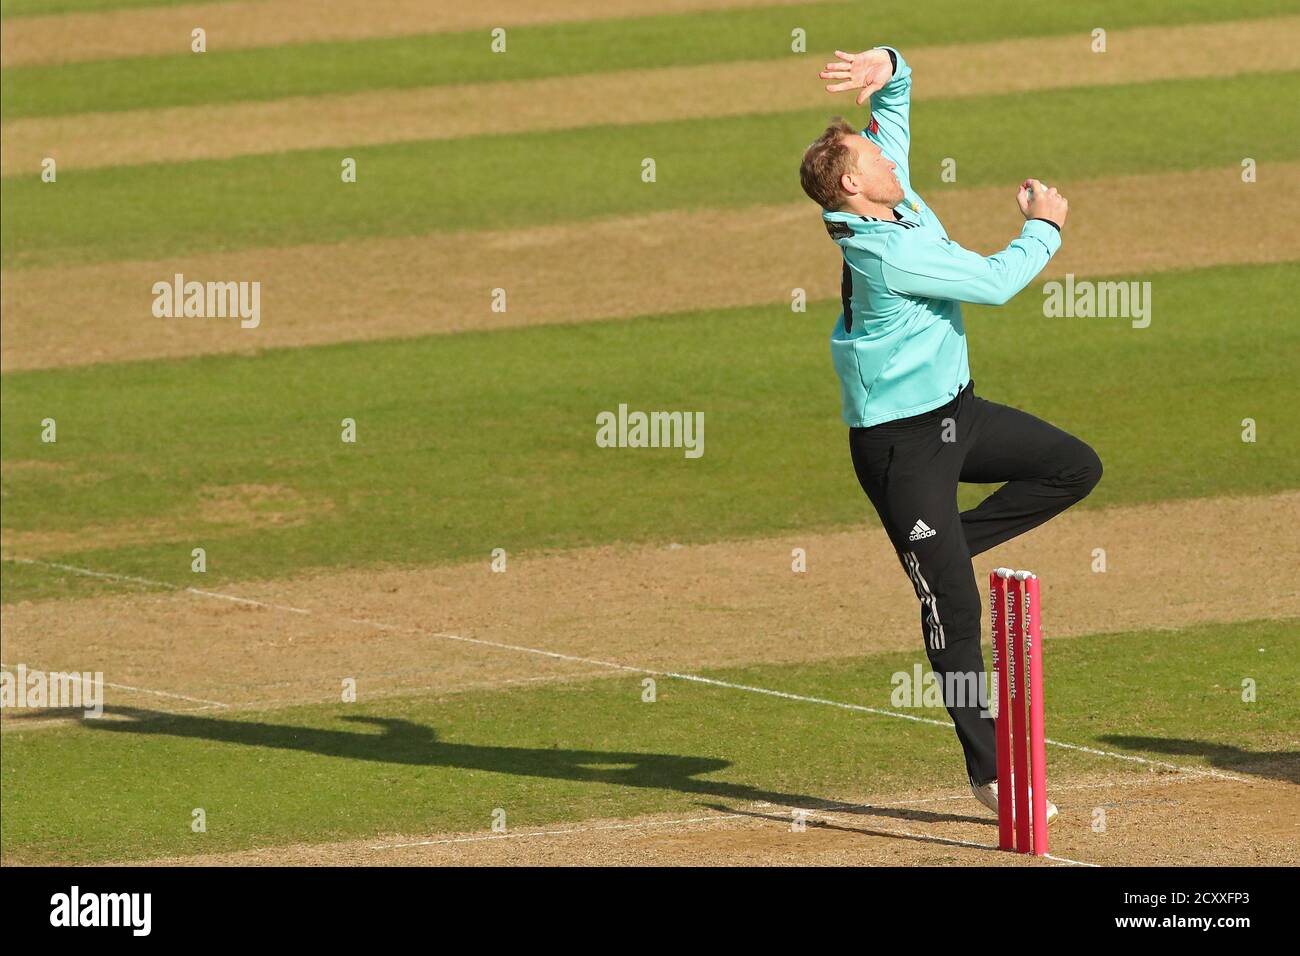 London, UK. 01st Oct, 2020. LONDON, ENGLAND. OCTOBER 01 2020. Gareth Batty of Surrey bowling during the Vitality Blast Quarter Final match Surrey v Kent Spitfires at The Kia Oval Cricket Ground, London, England, 01 October 2020. (Photo by Mitchell Gunn/ESPA-Images) Credit: European Sports Photo Agency/Alamy Live News Stock Photo